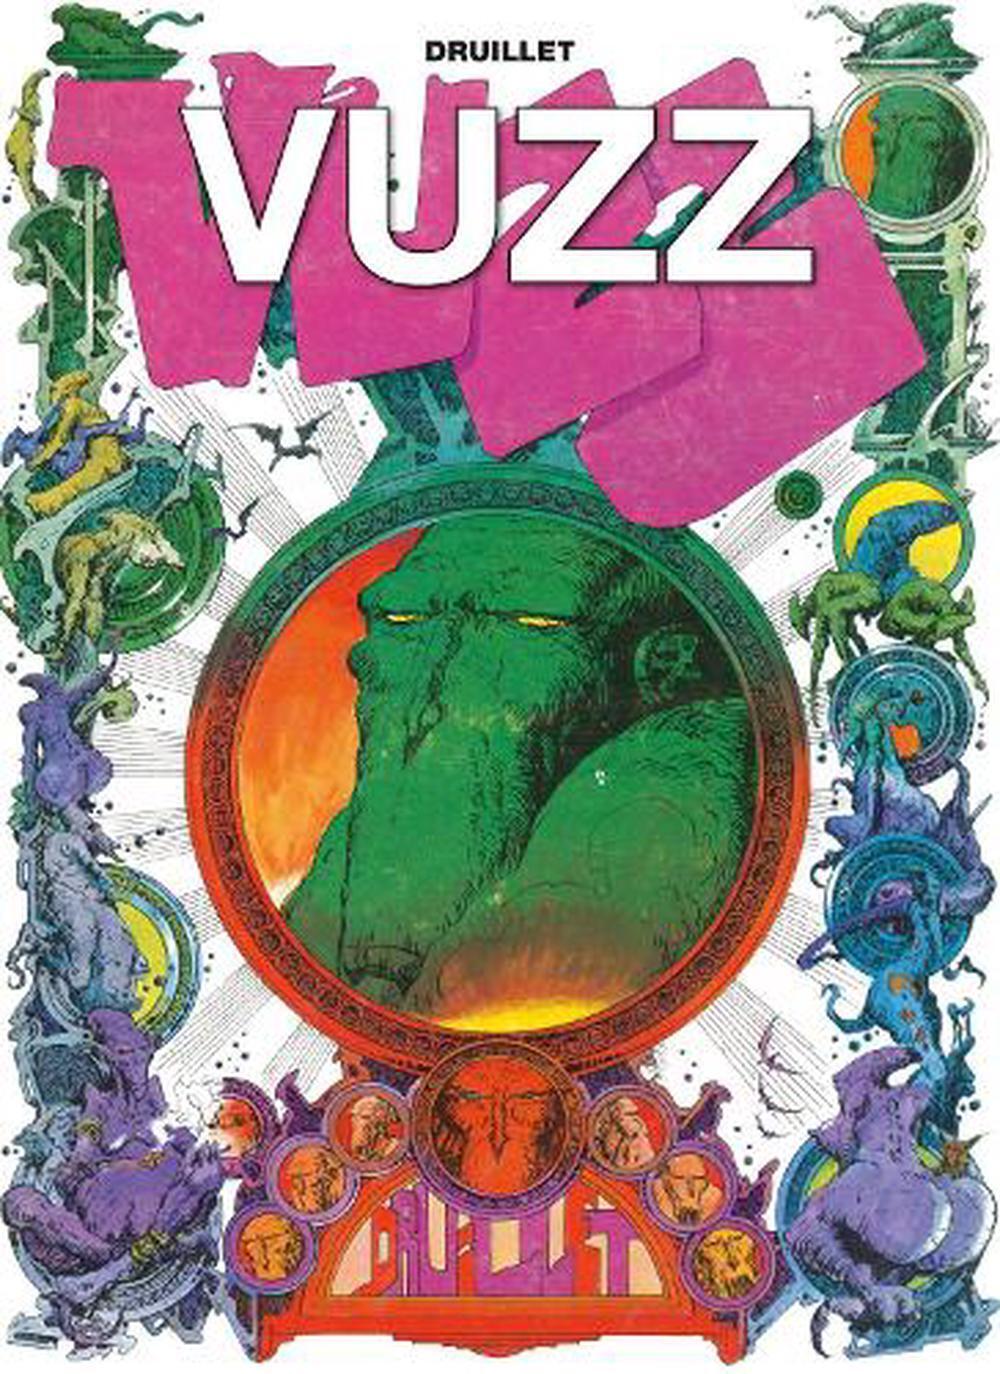 Vuzz by Philippe Druillet (English) Hardcover Book